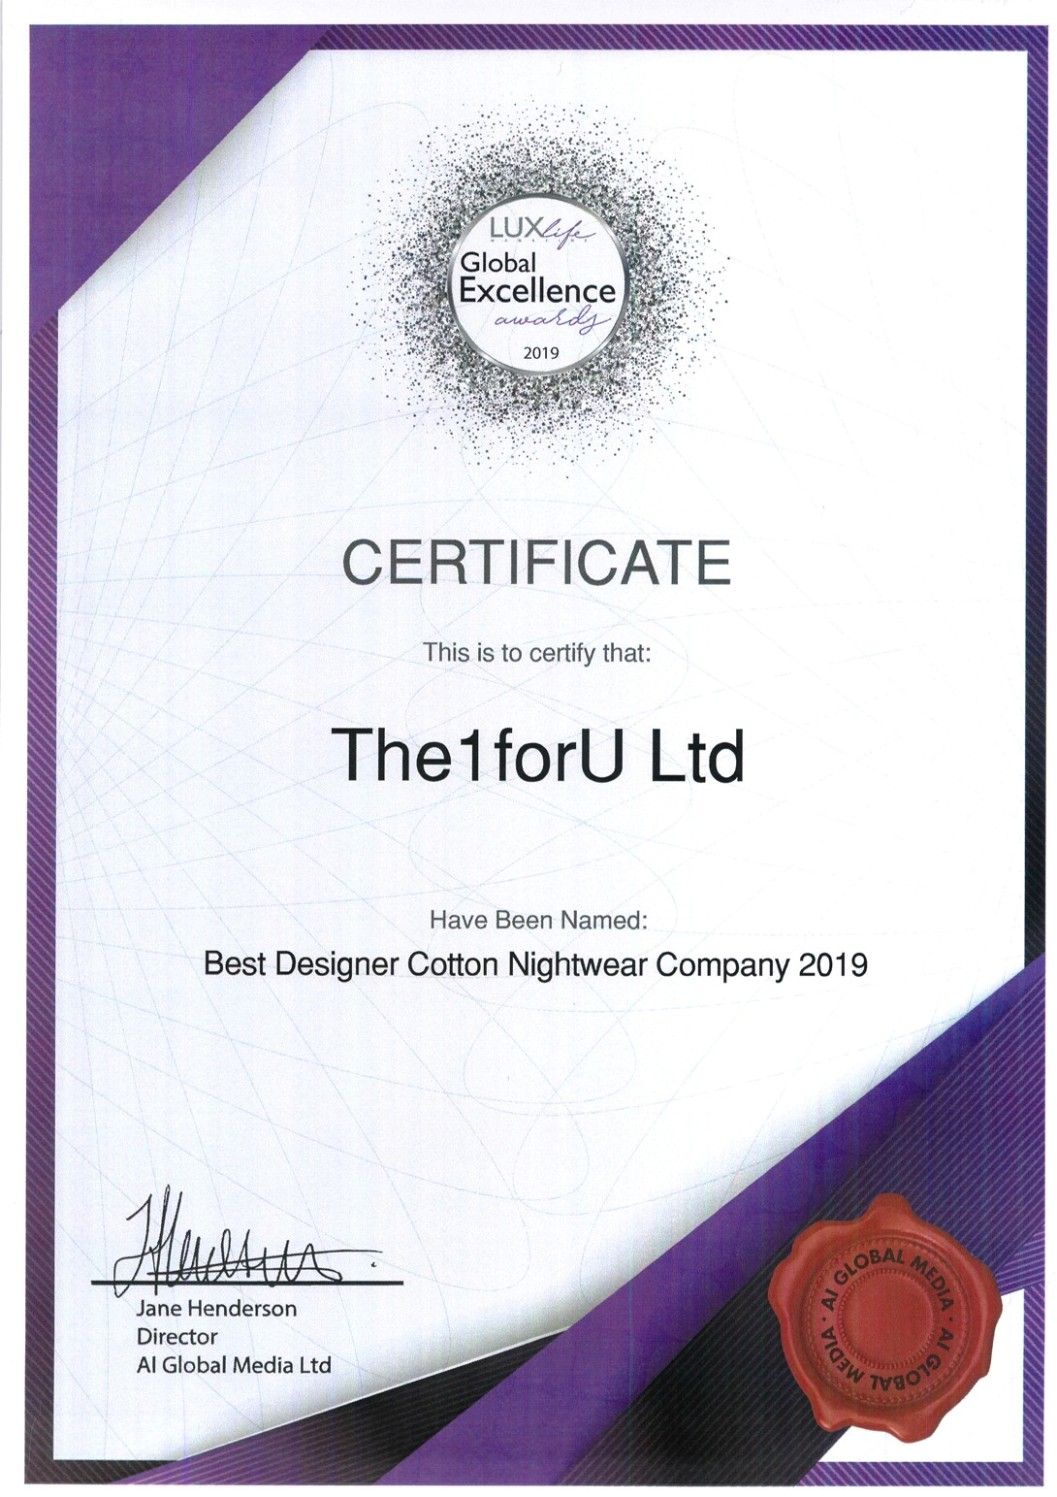 LUX Life Global Excellence Awards 2019 Certificate. This is to certify The1forU Limited have been named Best Designer Cotton Nightwear Company 2019 - Jane Henderson, Director AI Global Media Limted